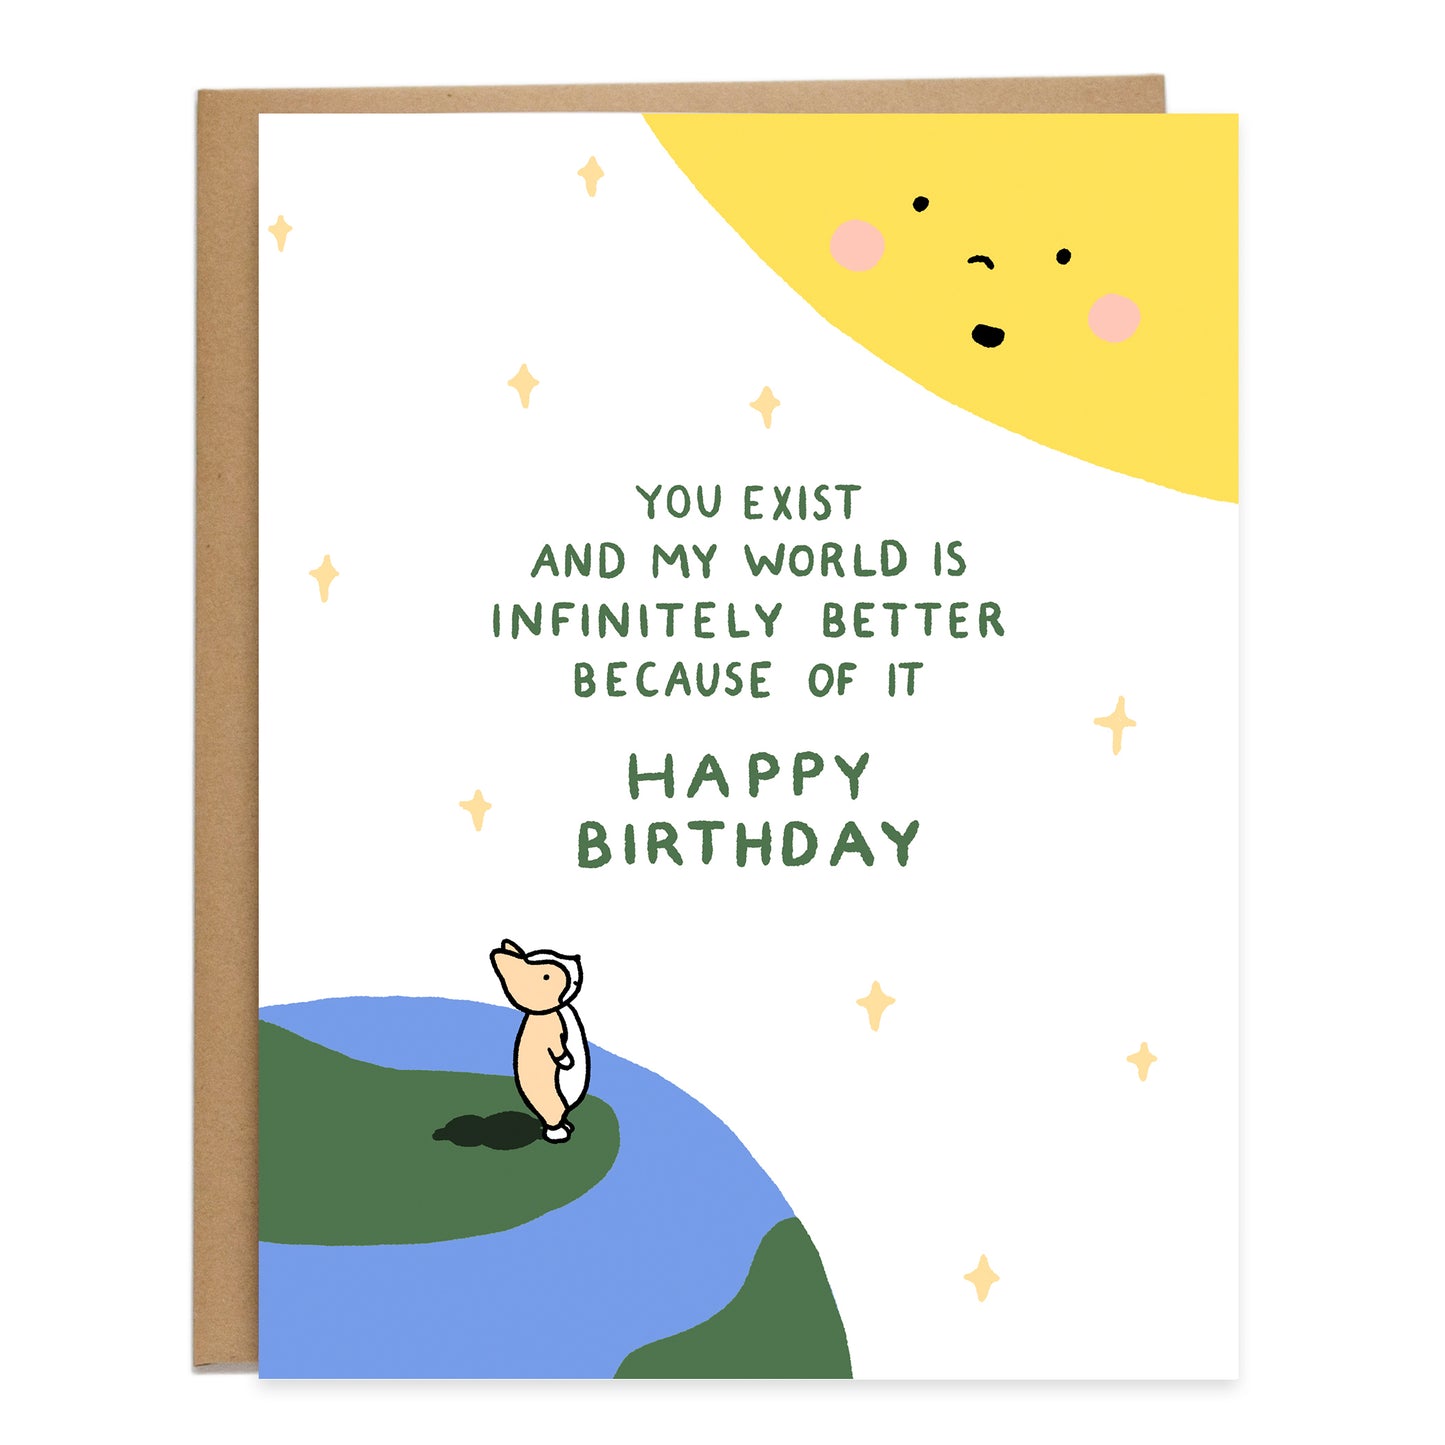 A birthday card with a drawing of a corgi standing on planet earth, on the bottom left hand corner, looking up at a big, smiling sun, at the top right hand corner. The card reads, you exist and my world is infinitely better because of it, happy birthday